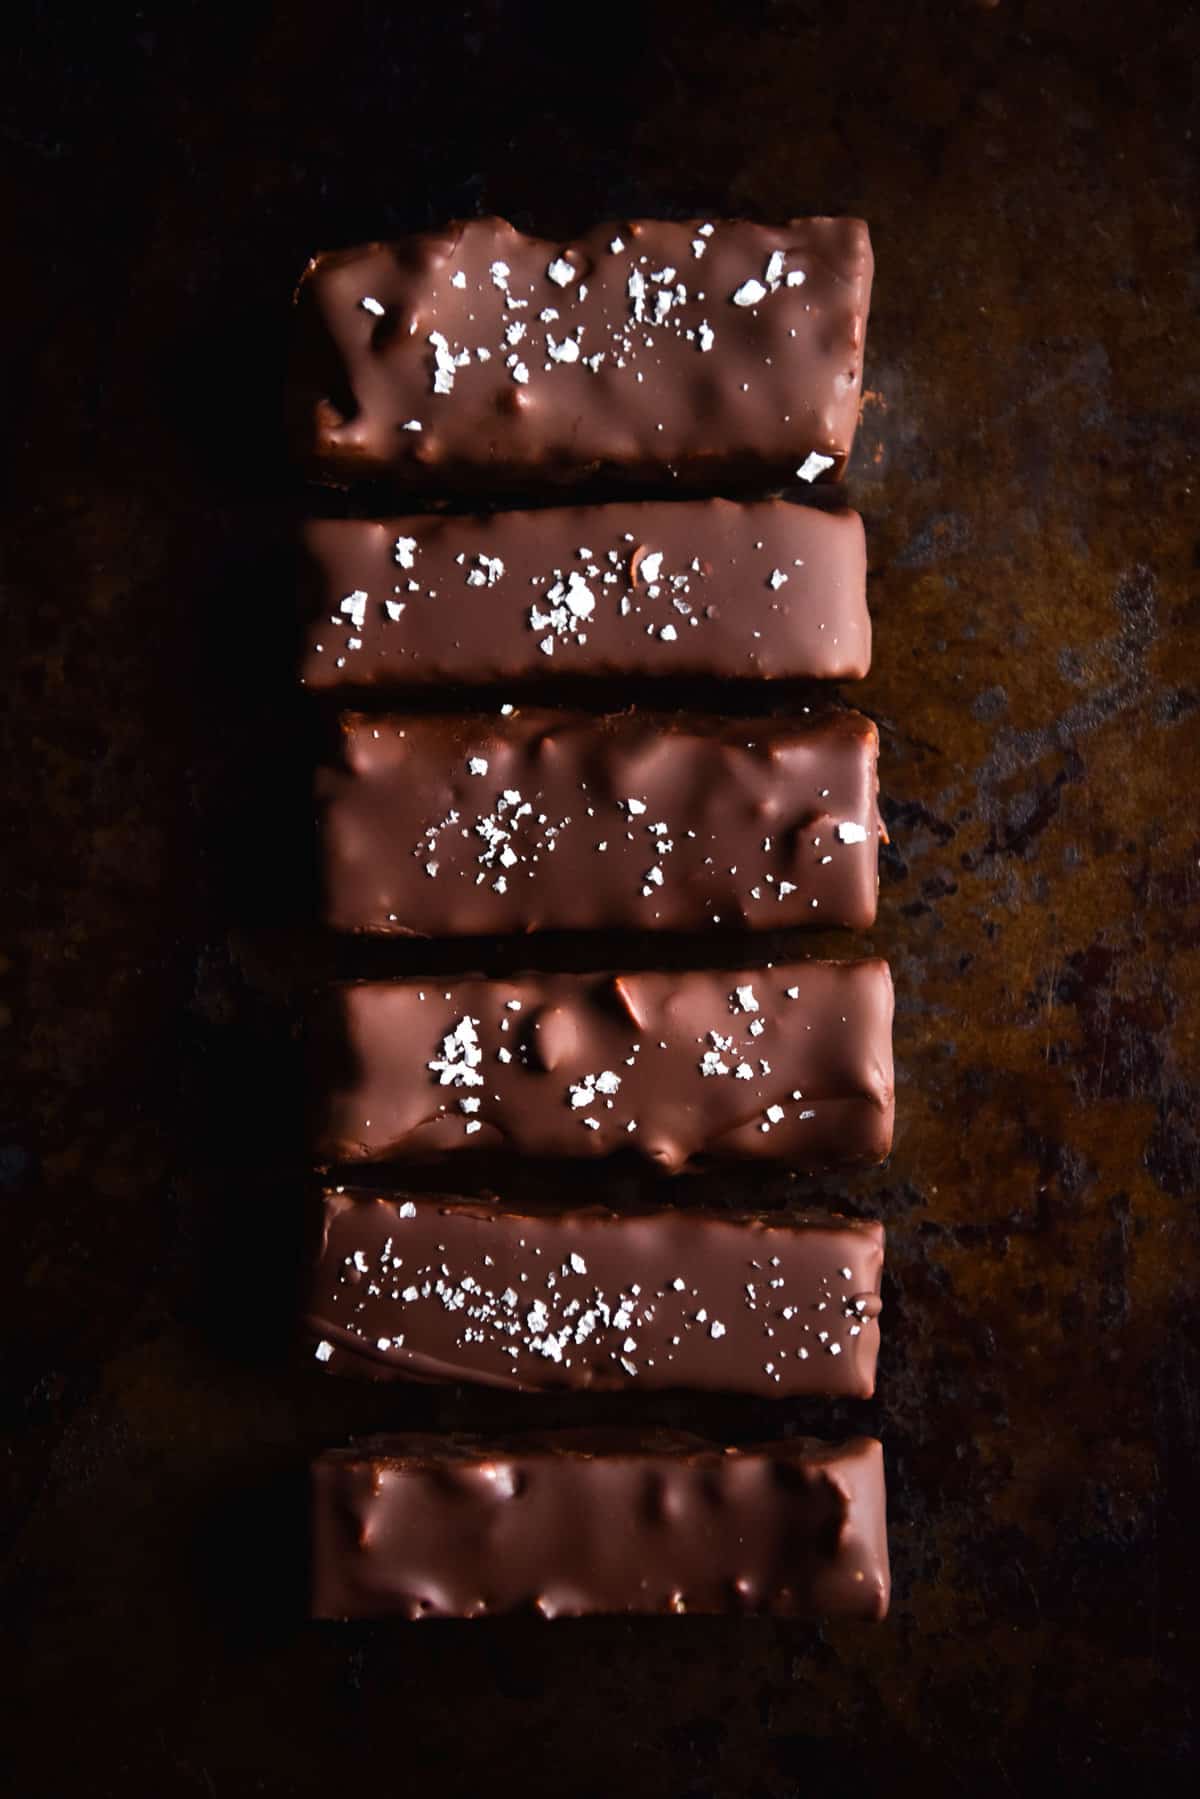 An aerial image of a line of vegan peanut butter chocolate covered bars on a rust coloured backdrop. The bars are chocolate brown in colour and finished with sea salt flakes.